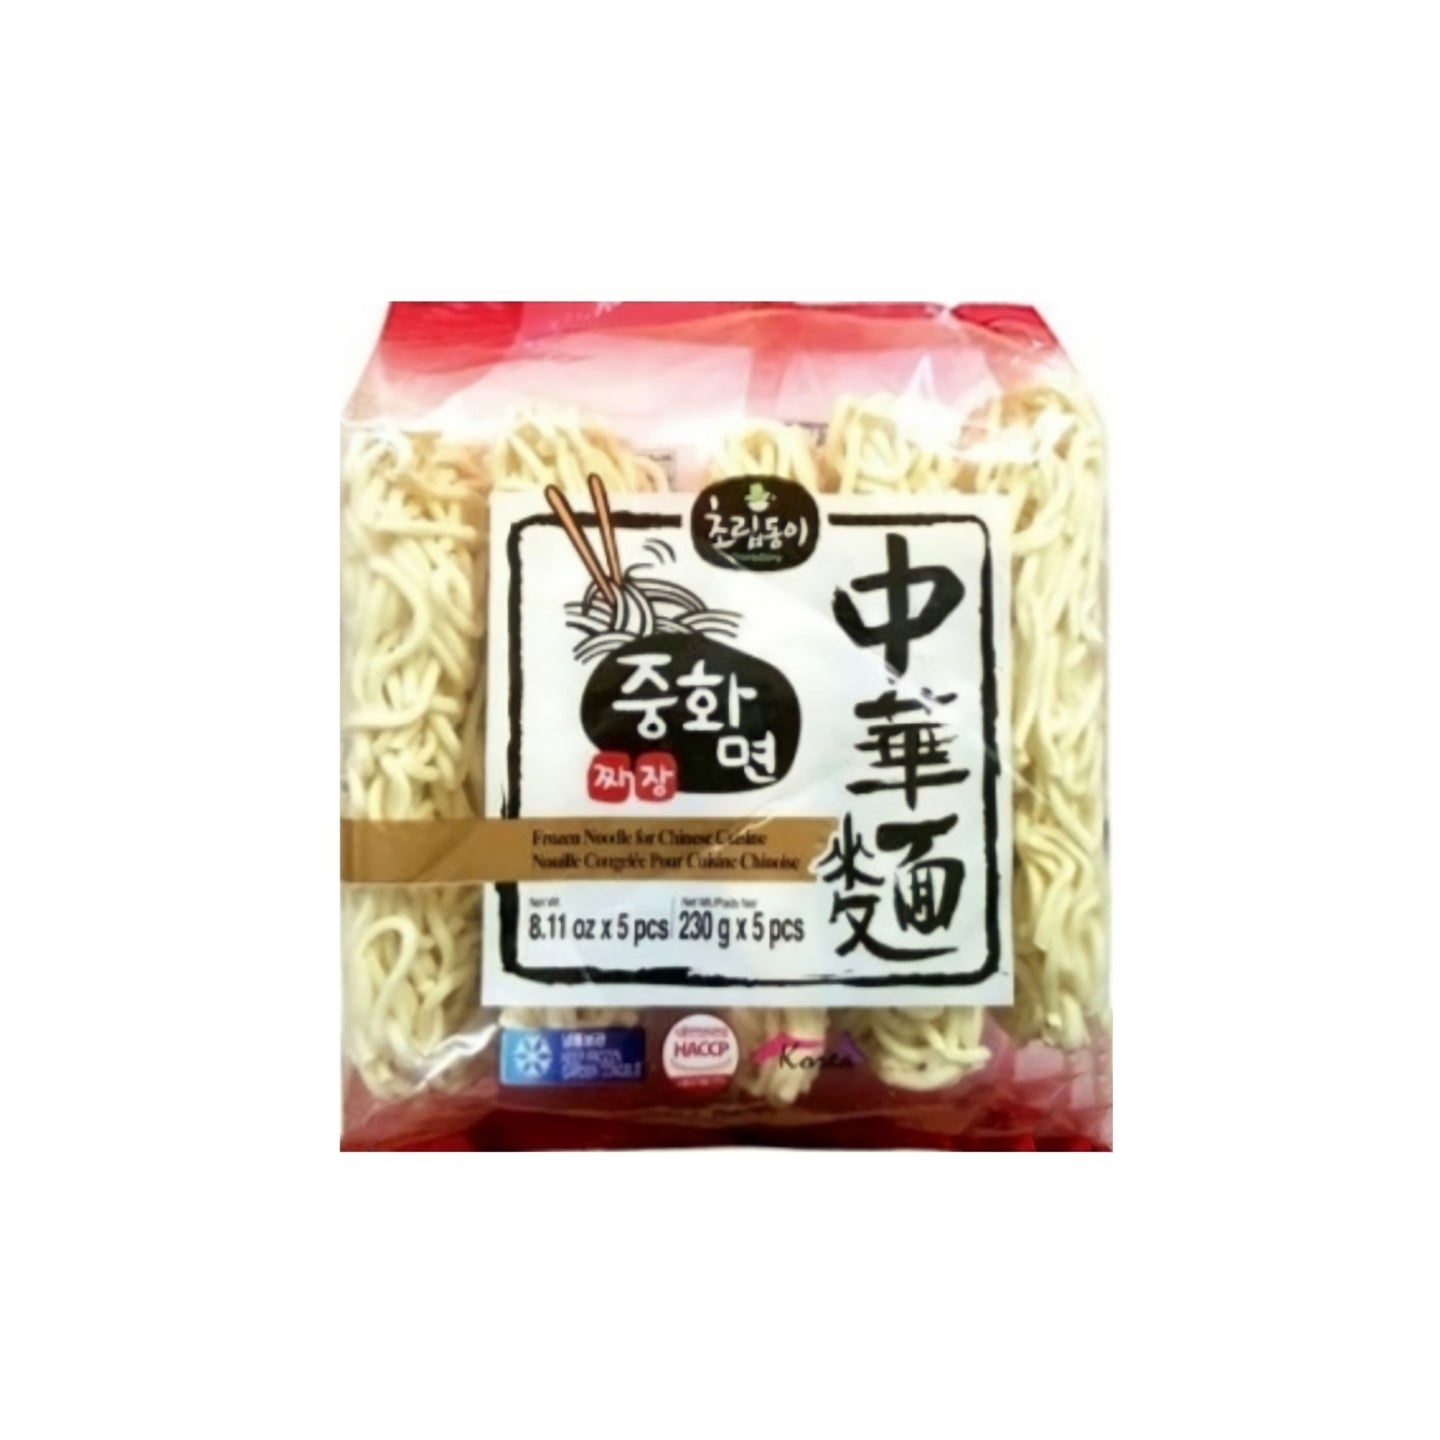 Frozen Noodle for Chinese Cuisine 중화면 5/230g